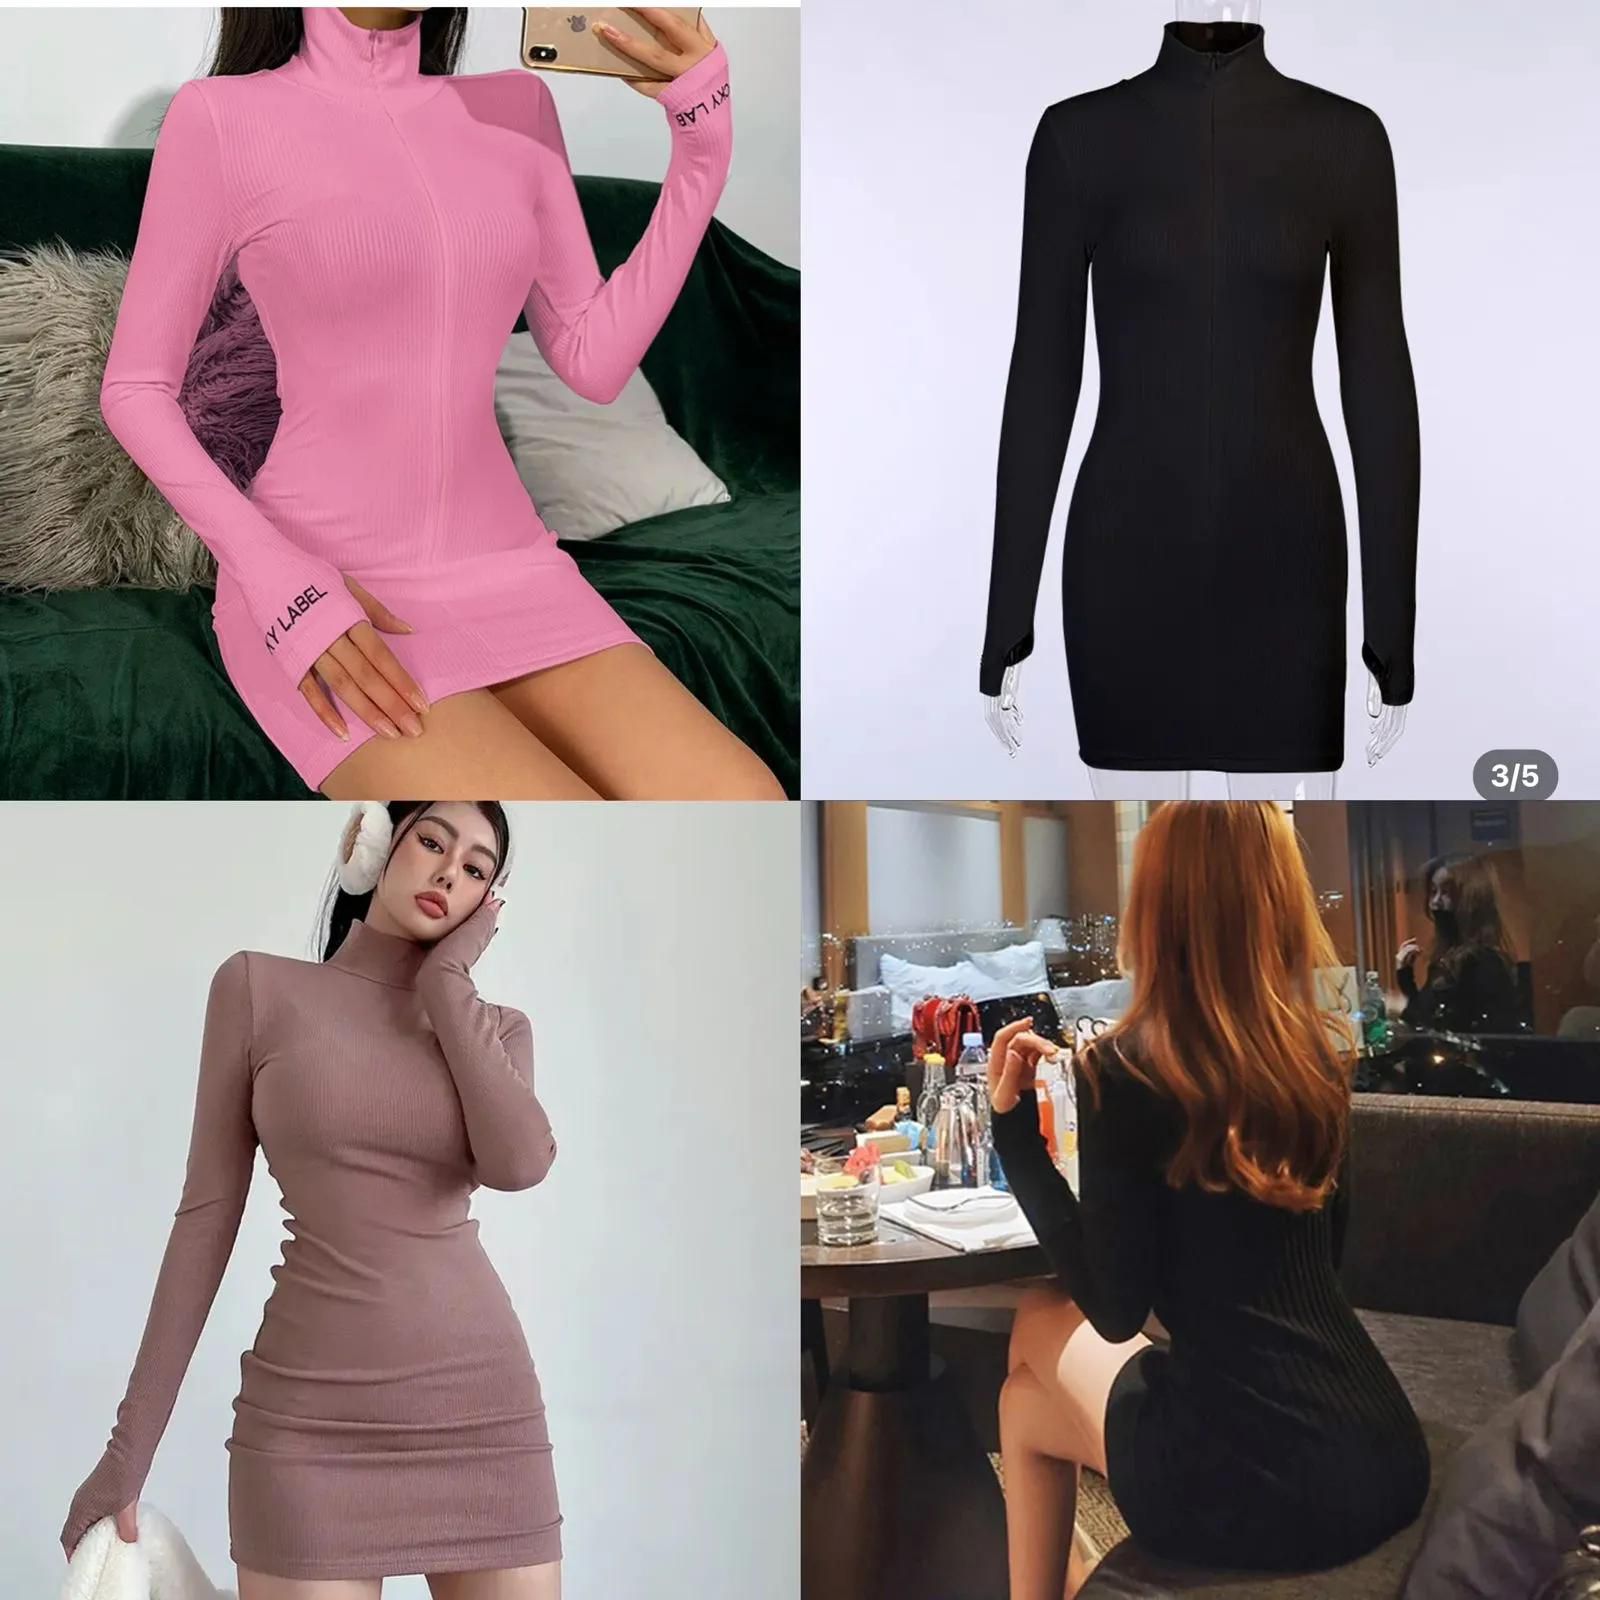 WOMEN PARTY DRESS RIBBED KNIT BODYCON COCKTAIL DATE NIGHT LONGSLEEVE LUCKY LABEL MIDI DRESS LADIES OUTFITS TRENDY WEAR ONE SIZE GOOD STRETCH